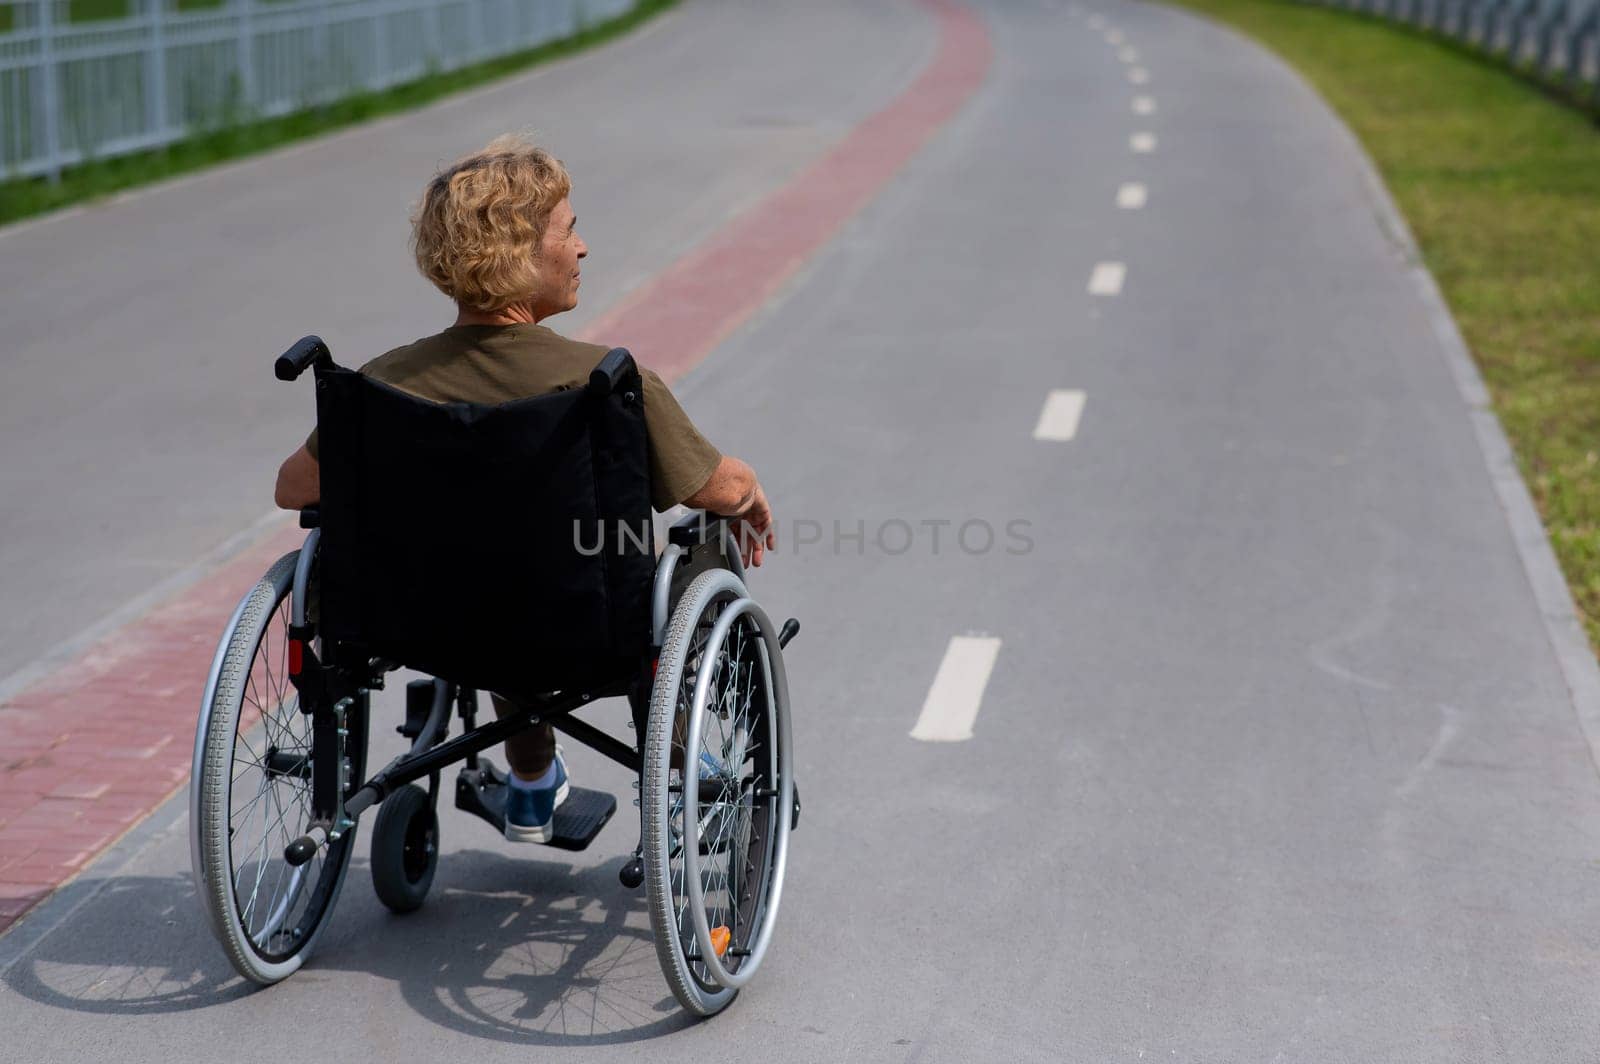 Rear view of an elderly woman in a wheelchair riding on a bike path